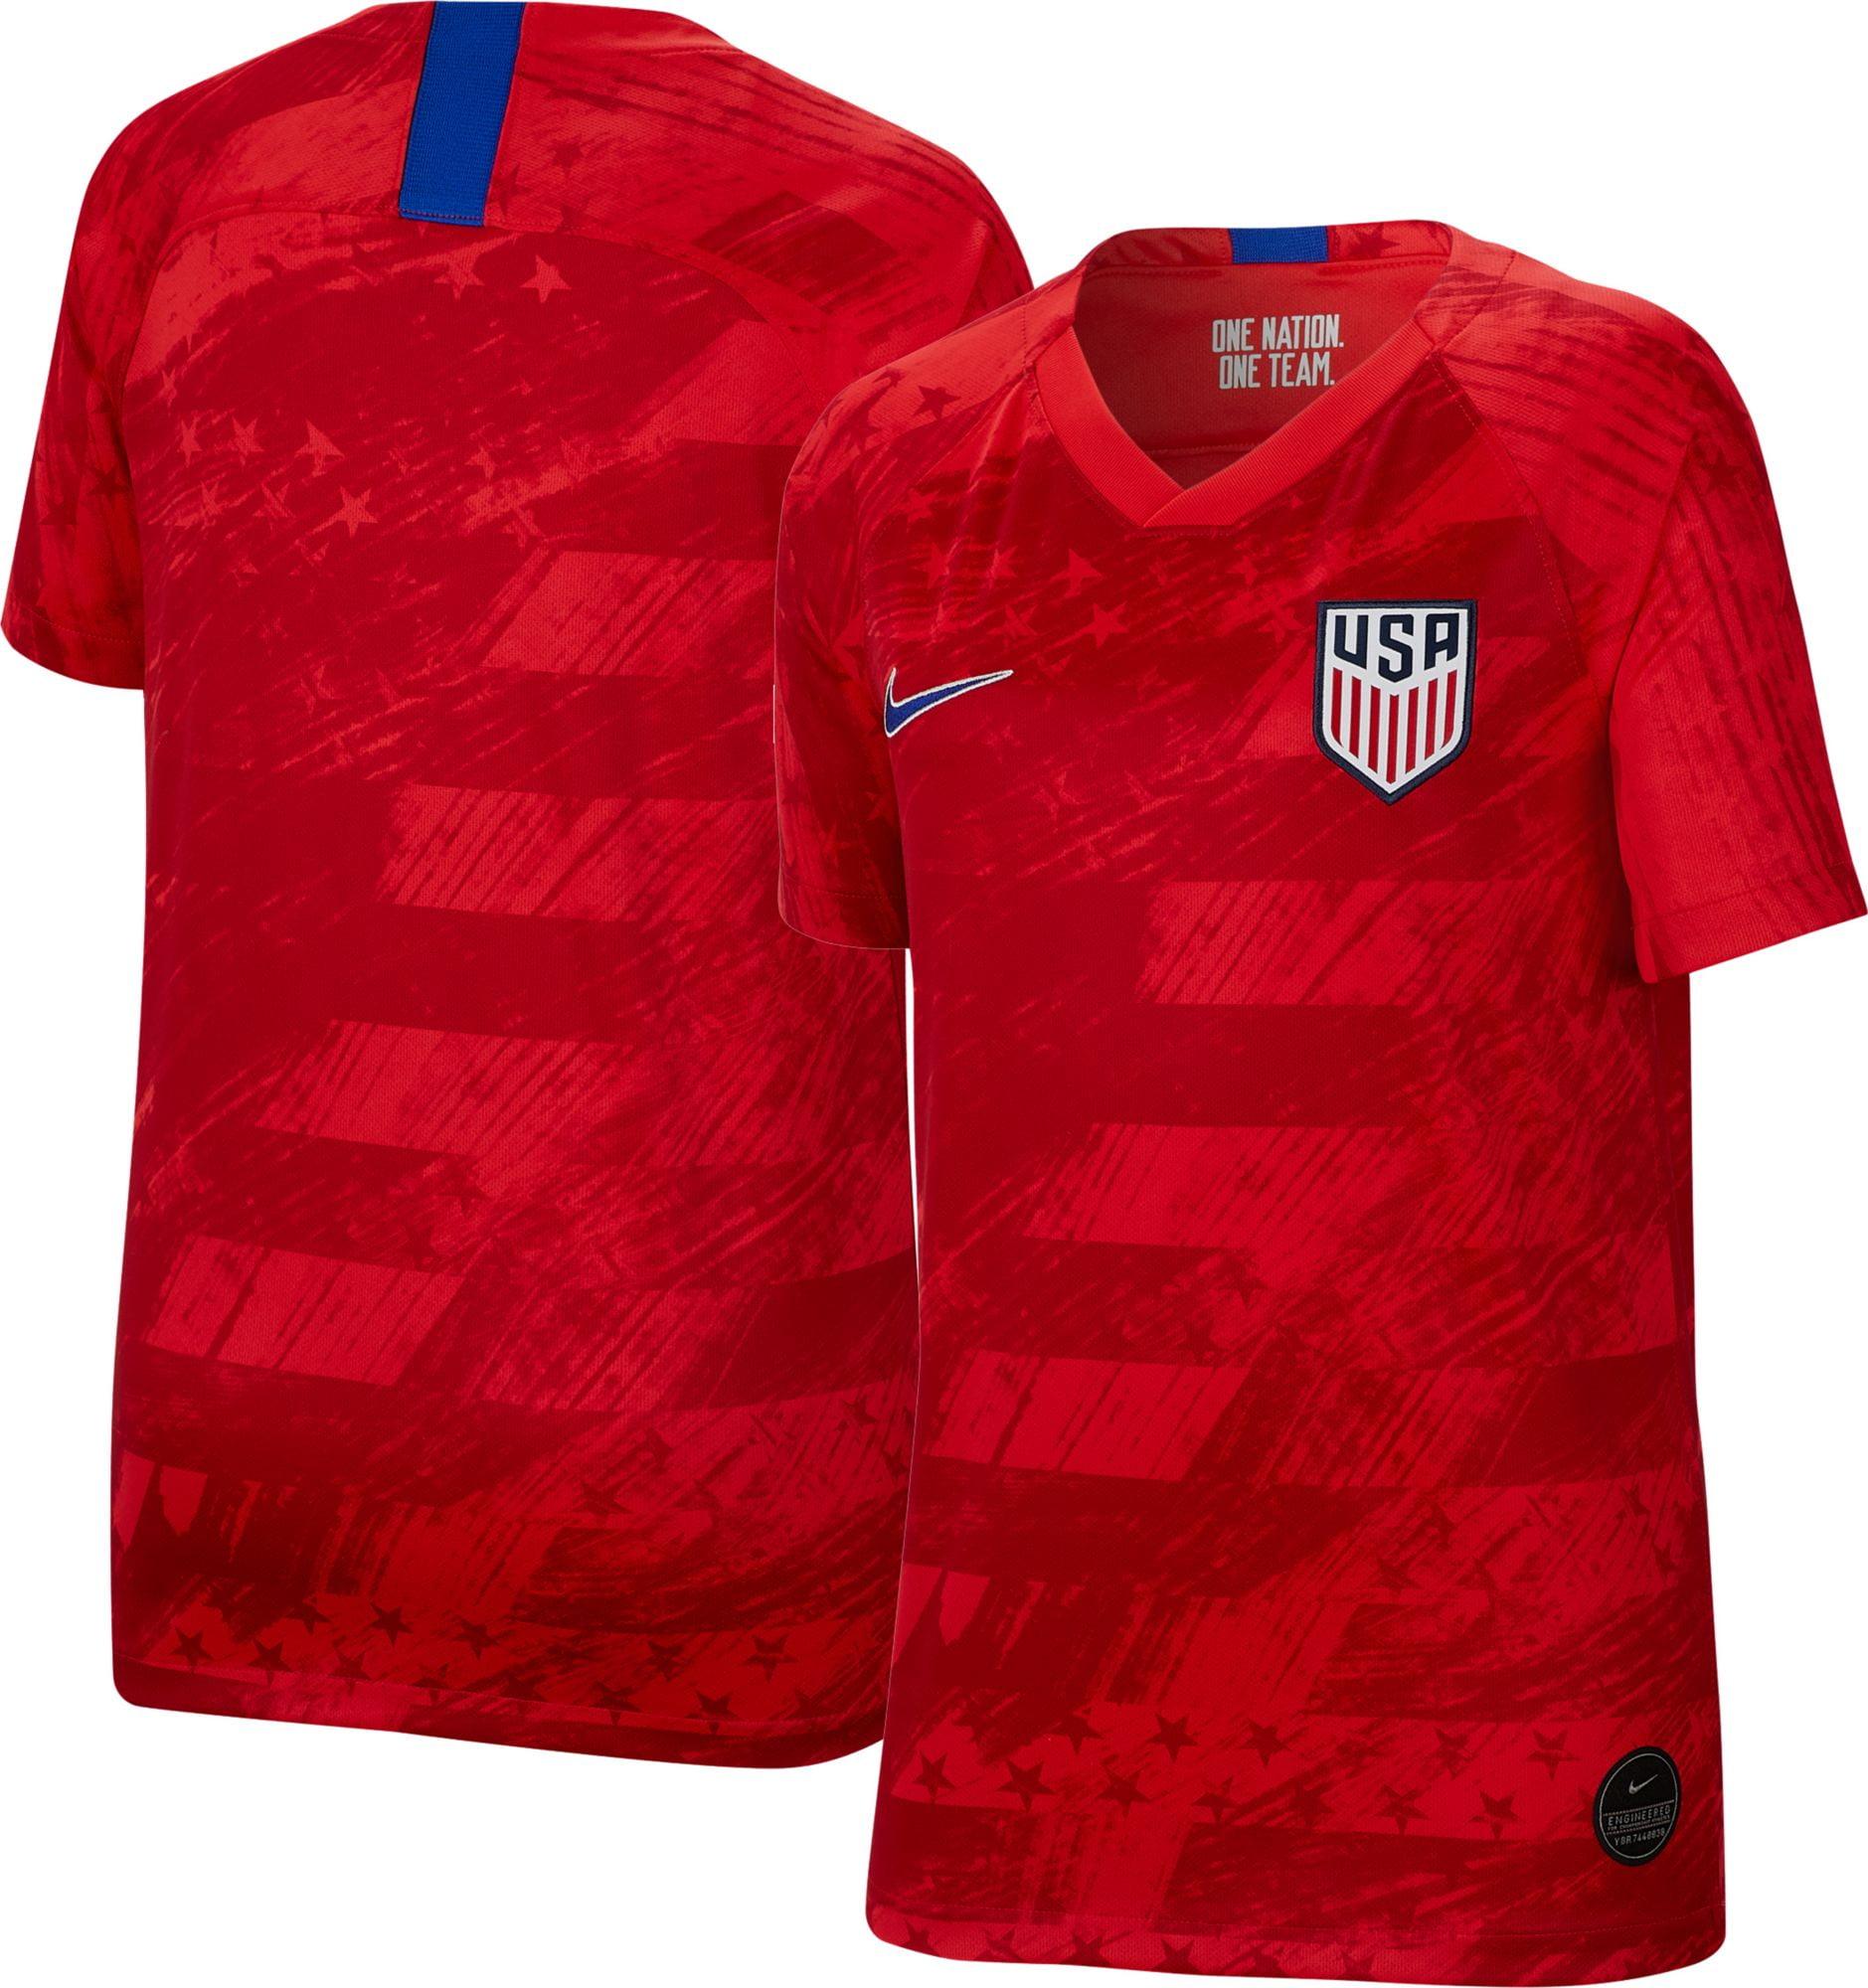 nike youth soccer uniforms